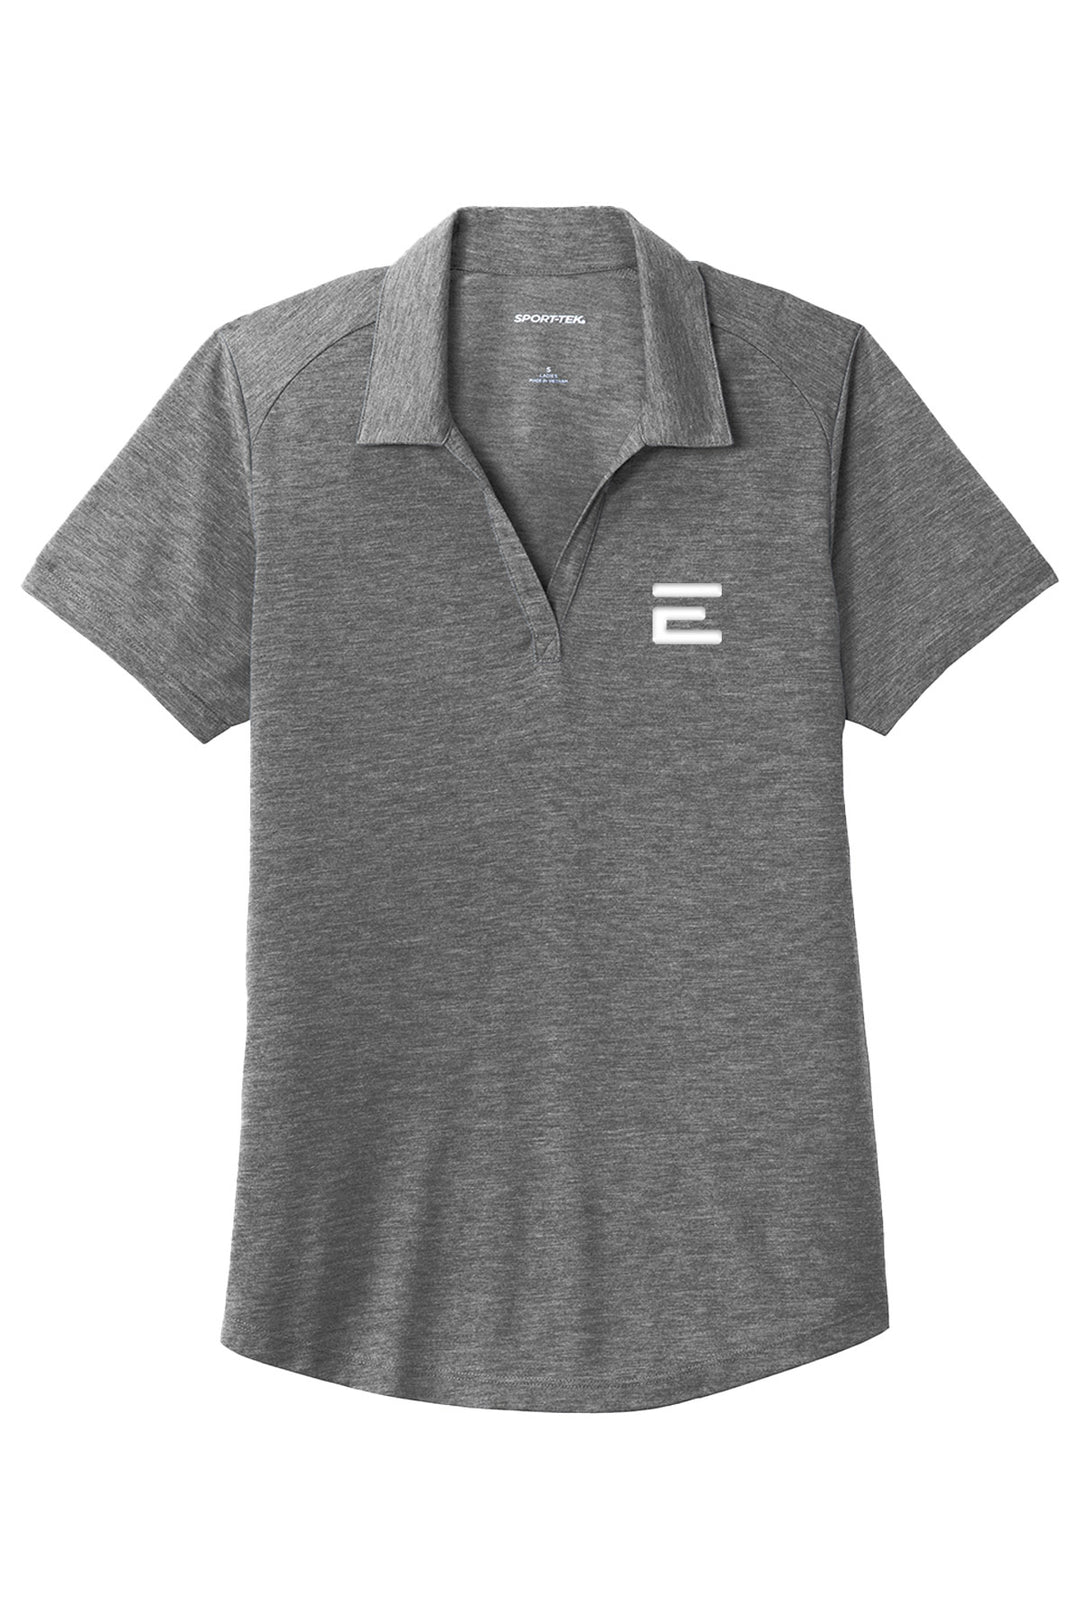 Ladies PosiCharge Tri-Blend Wicking Polo